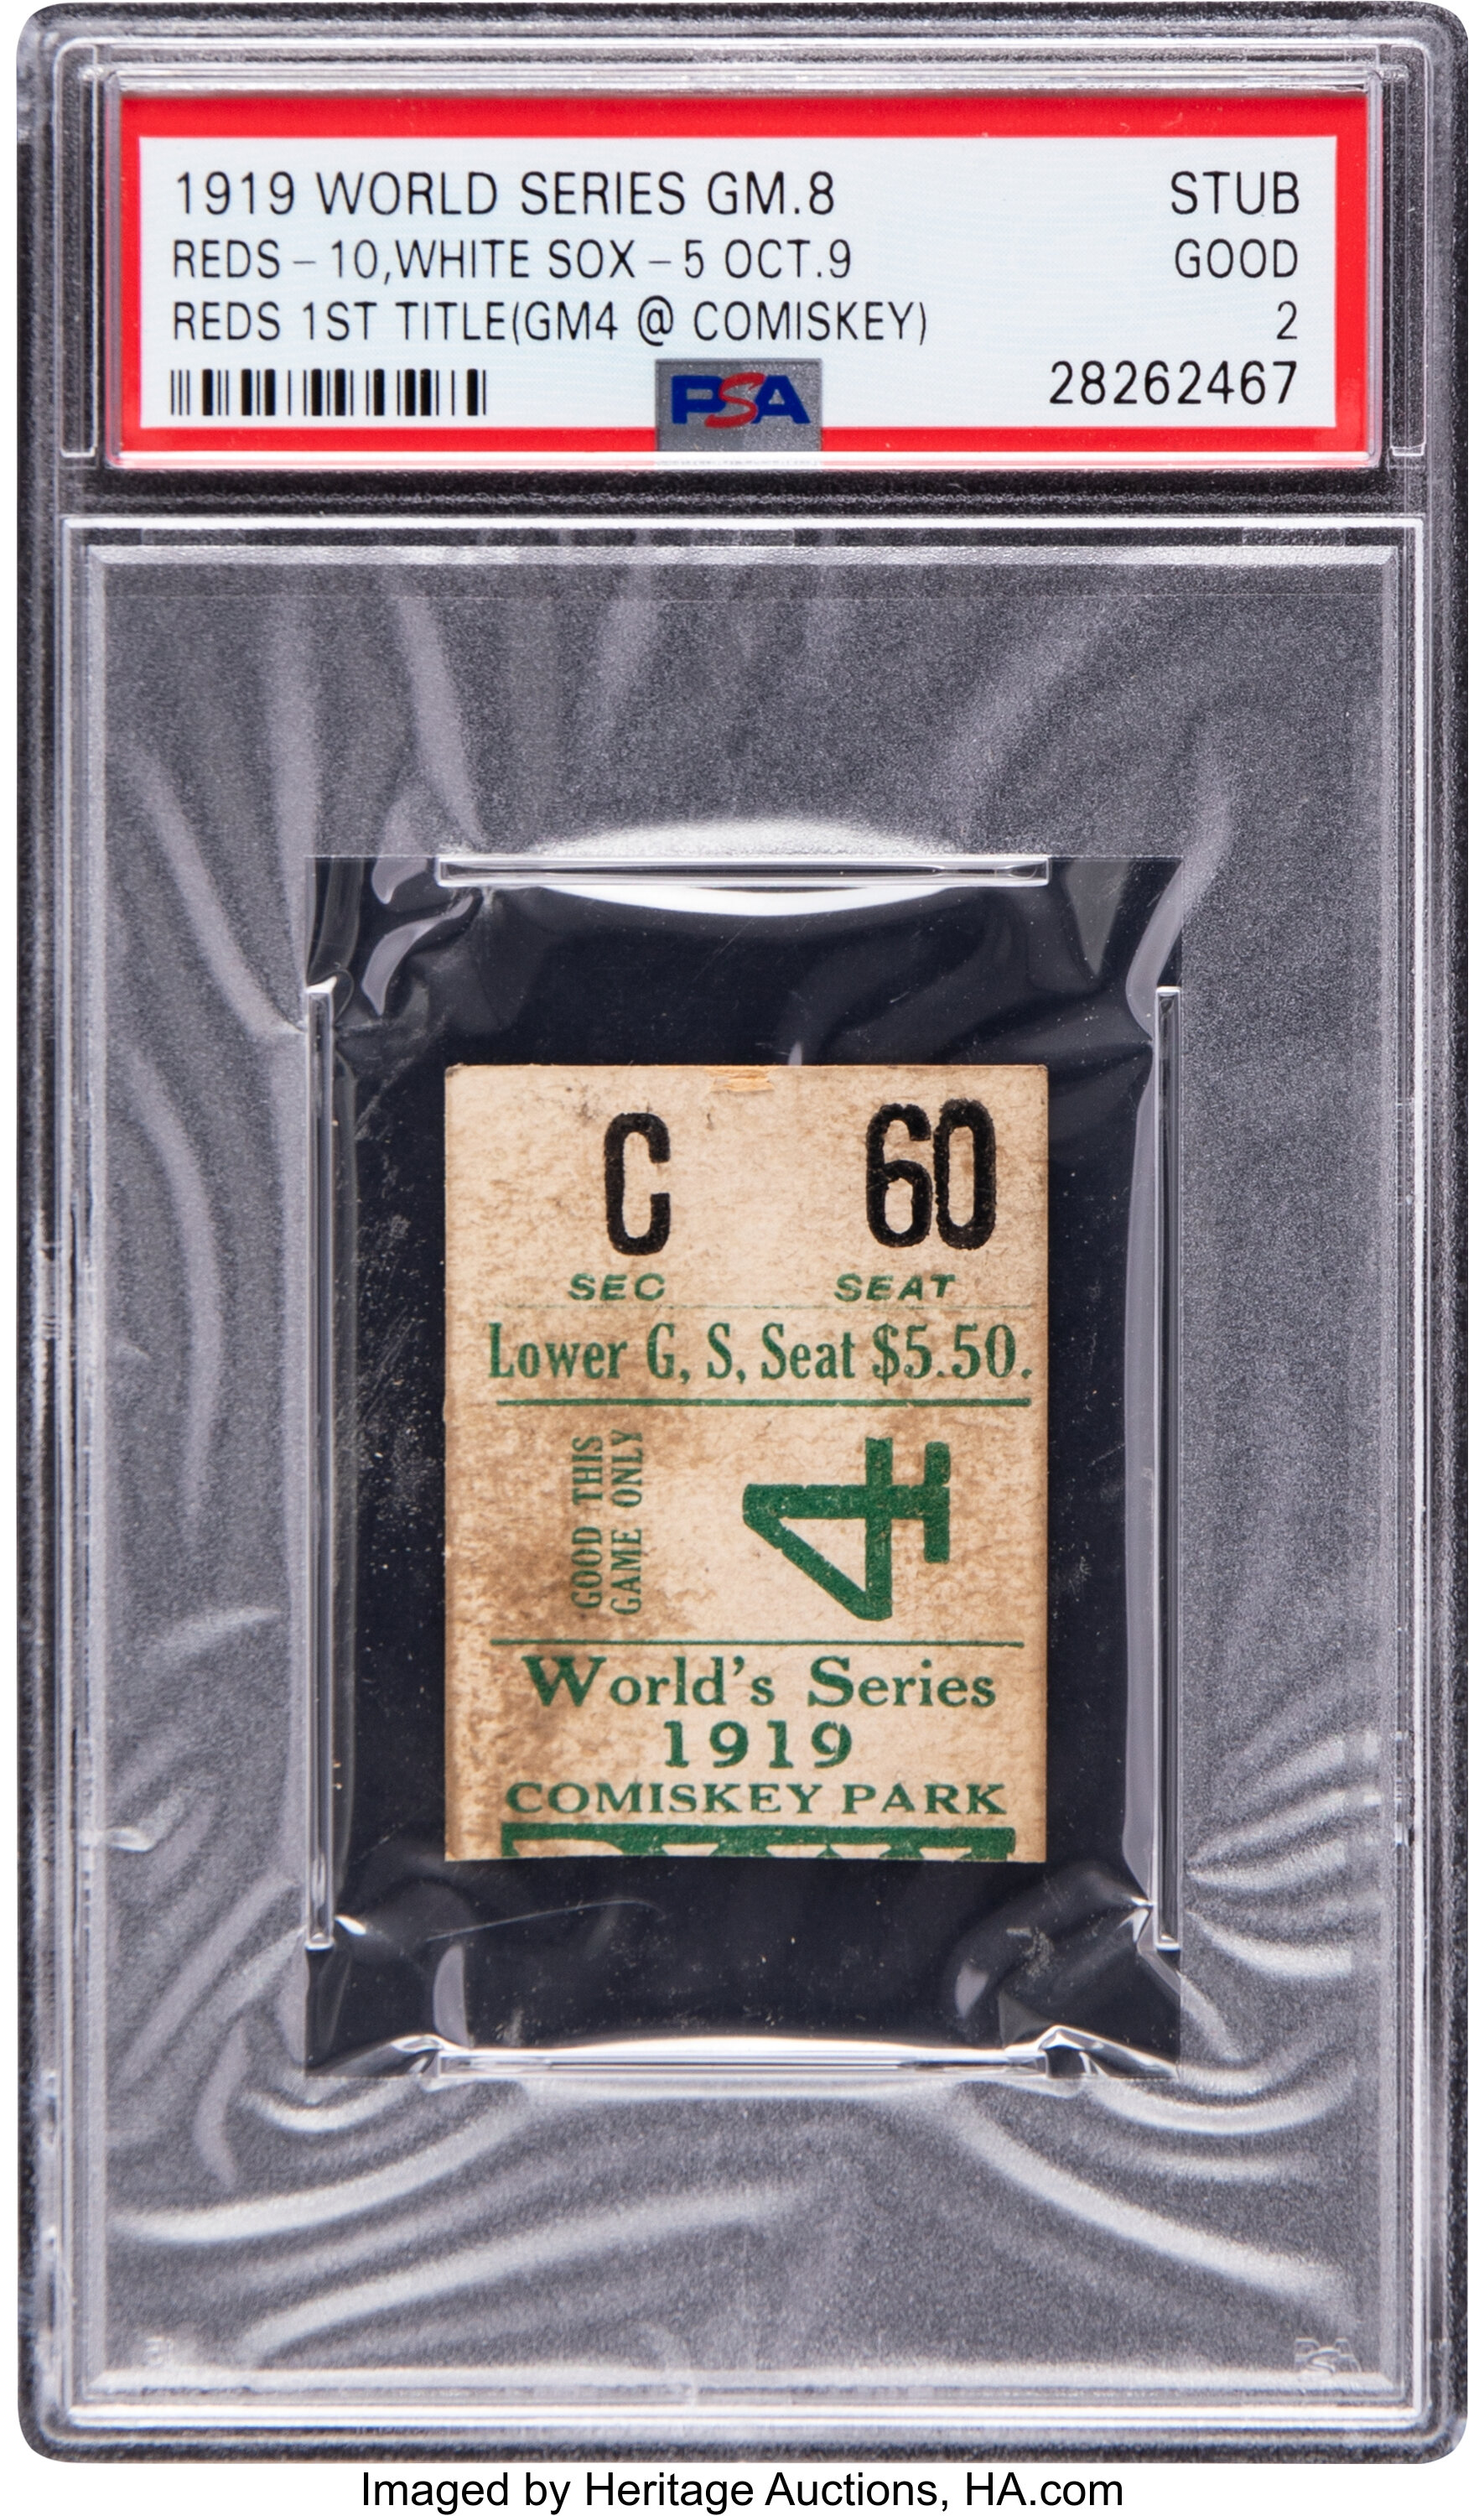 1919 World Series (Game 8) Ticket Stub, PSA Good 2 - Only Game 8 | Lot #56302 | Heritage Auctions